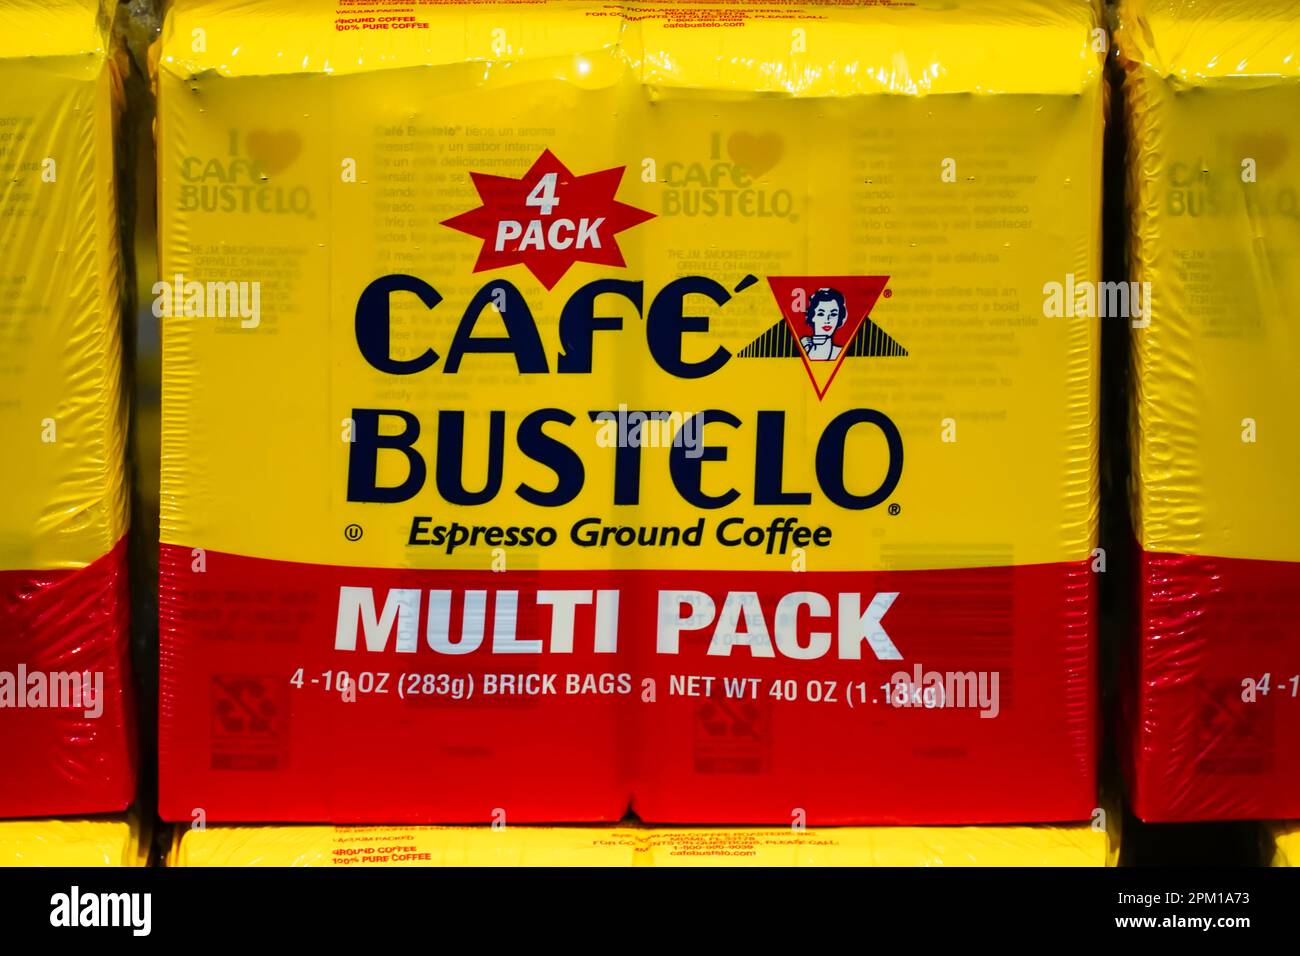 https://c8.alamy.com/comp/2PM1A73/bronx-ny-april-7-2023-cafe-bustelo-popular-latin-american-coffee-brand-yellow-bulk-container-on-wholesale-shelf-2PM1A73.jpg